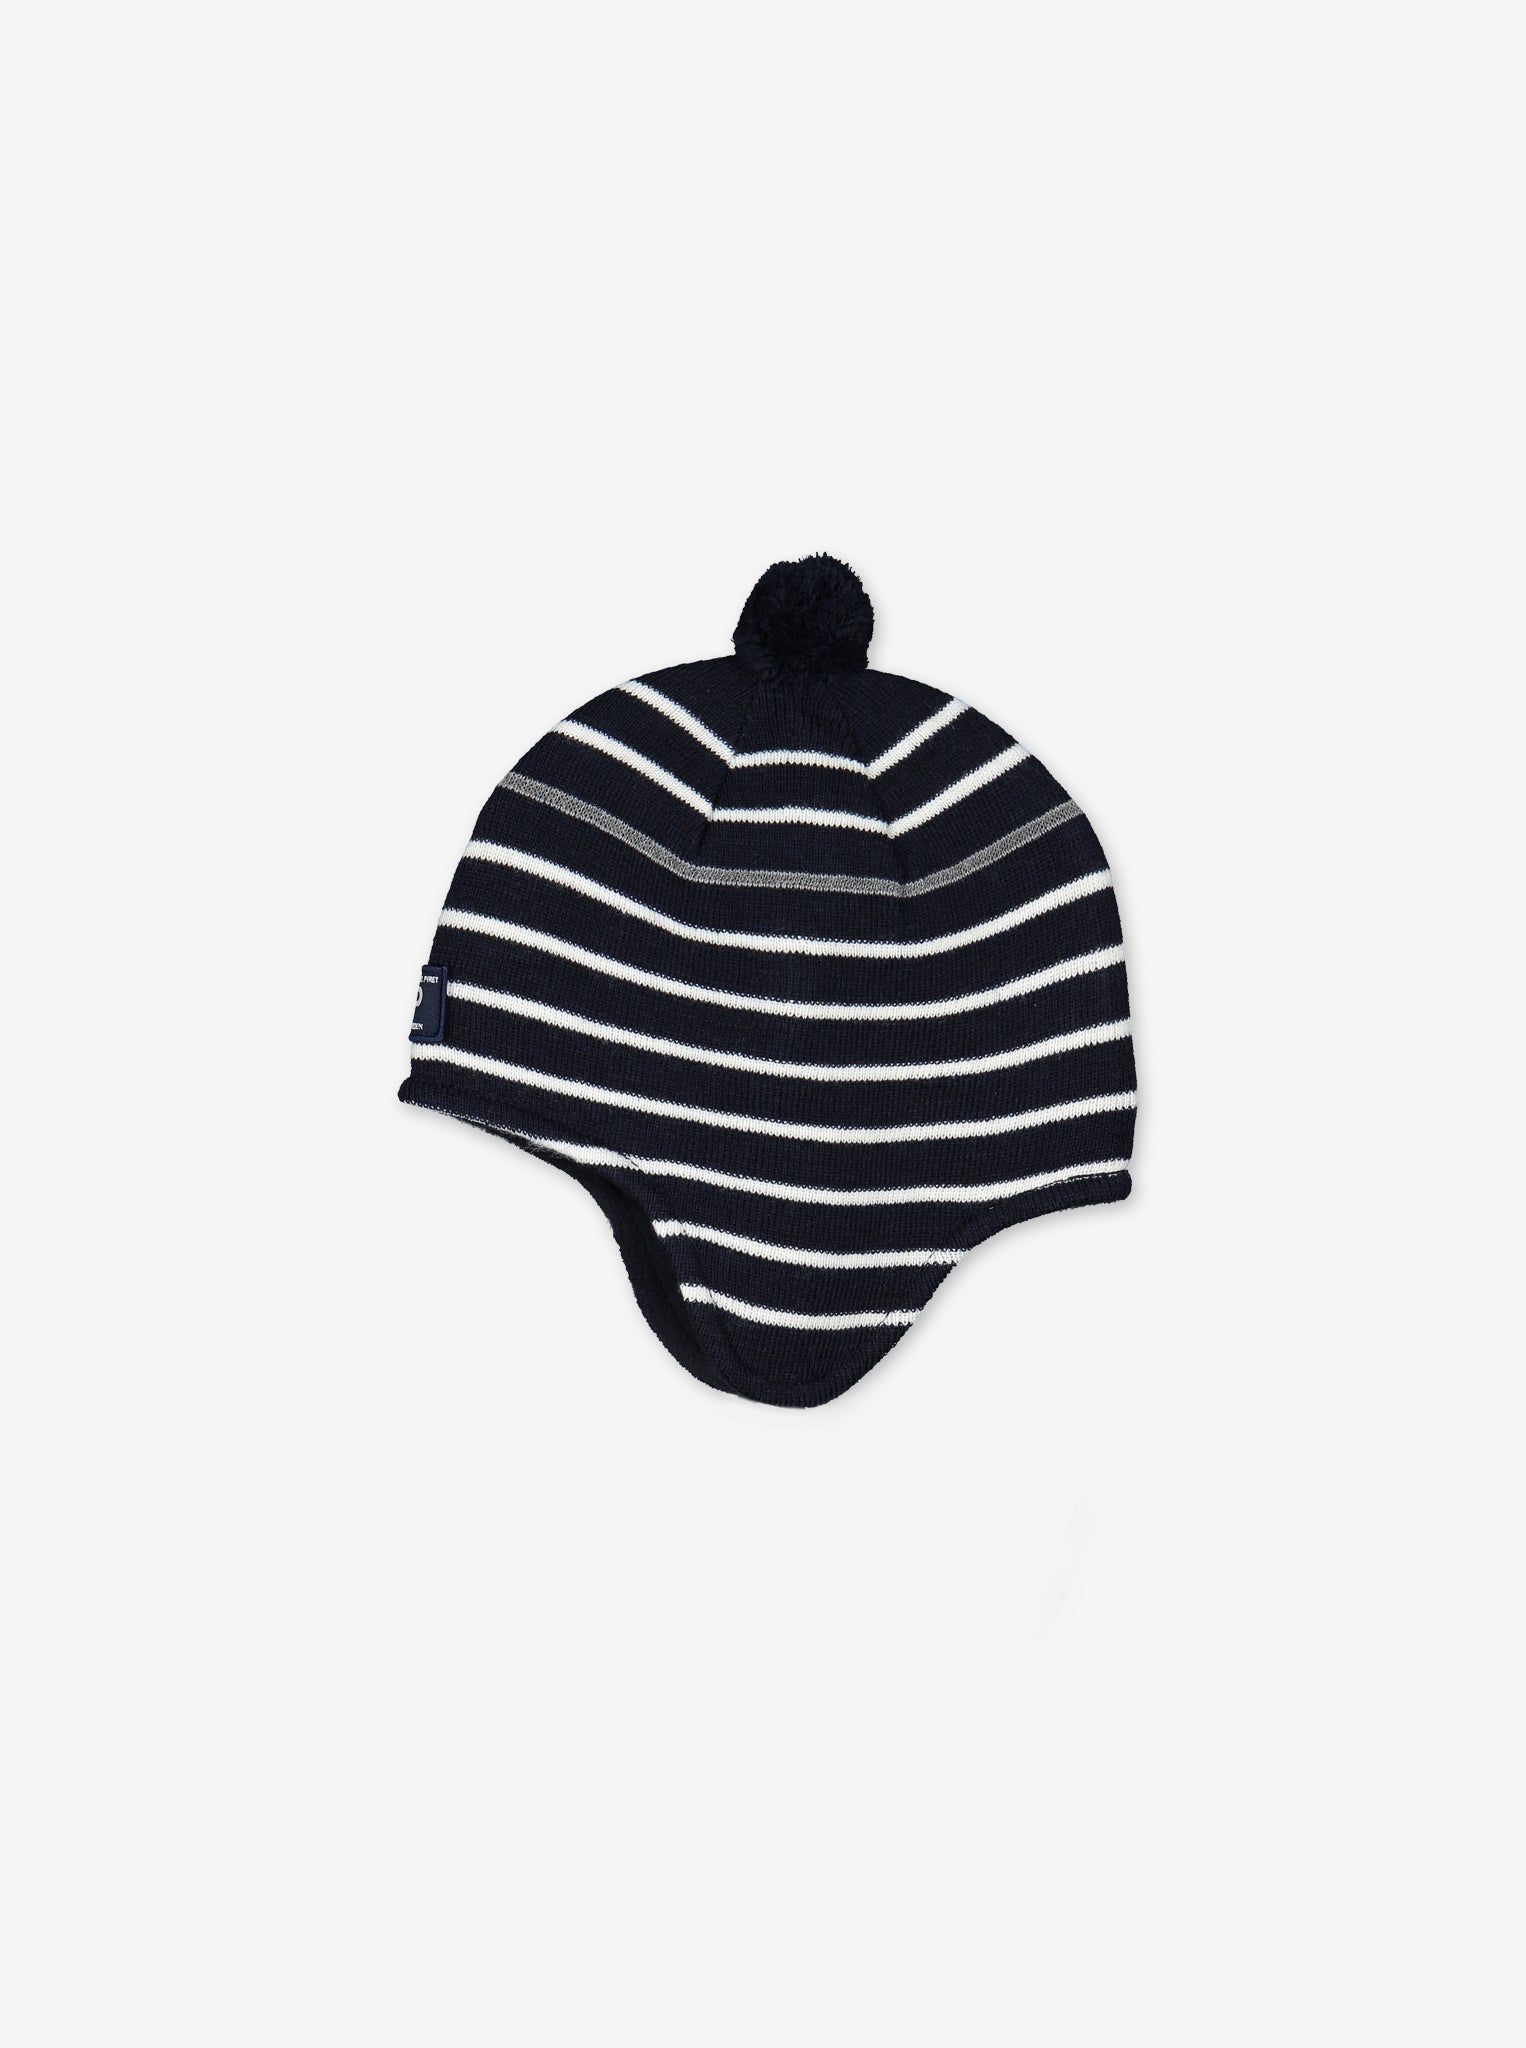 merino wool kids bobble hat, warm and windproof, ethical, polarn o. pyret quality